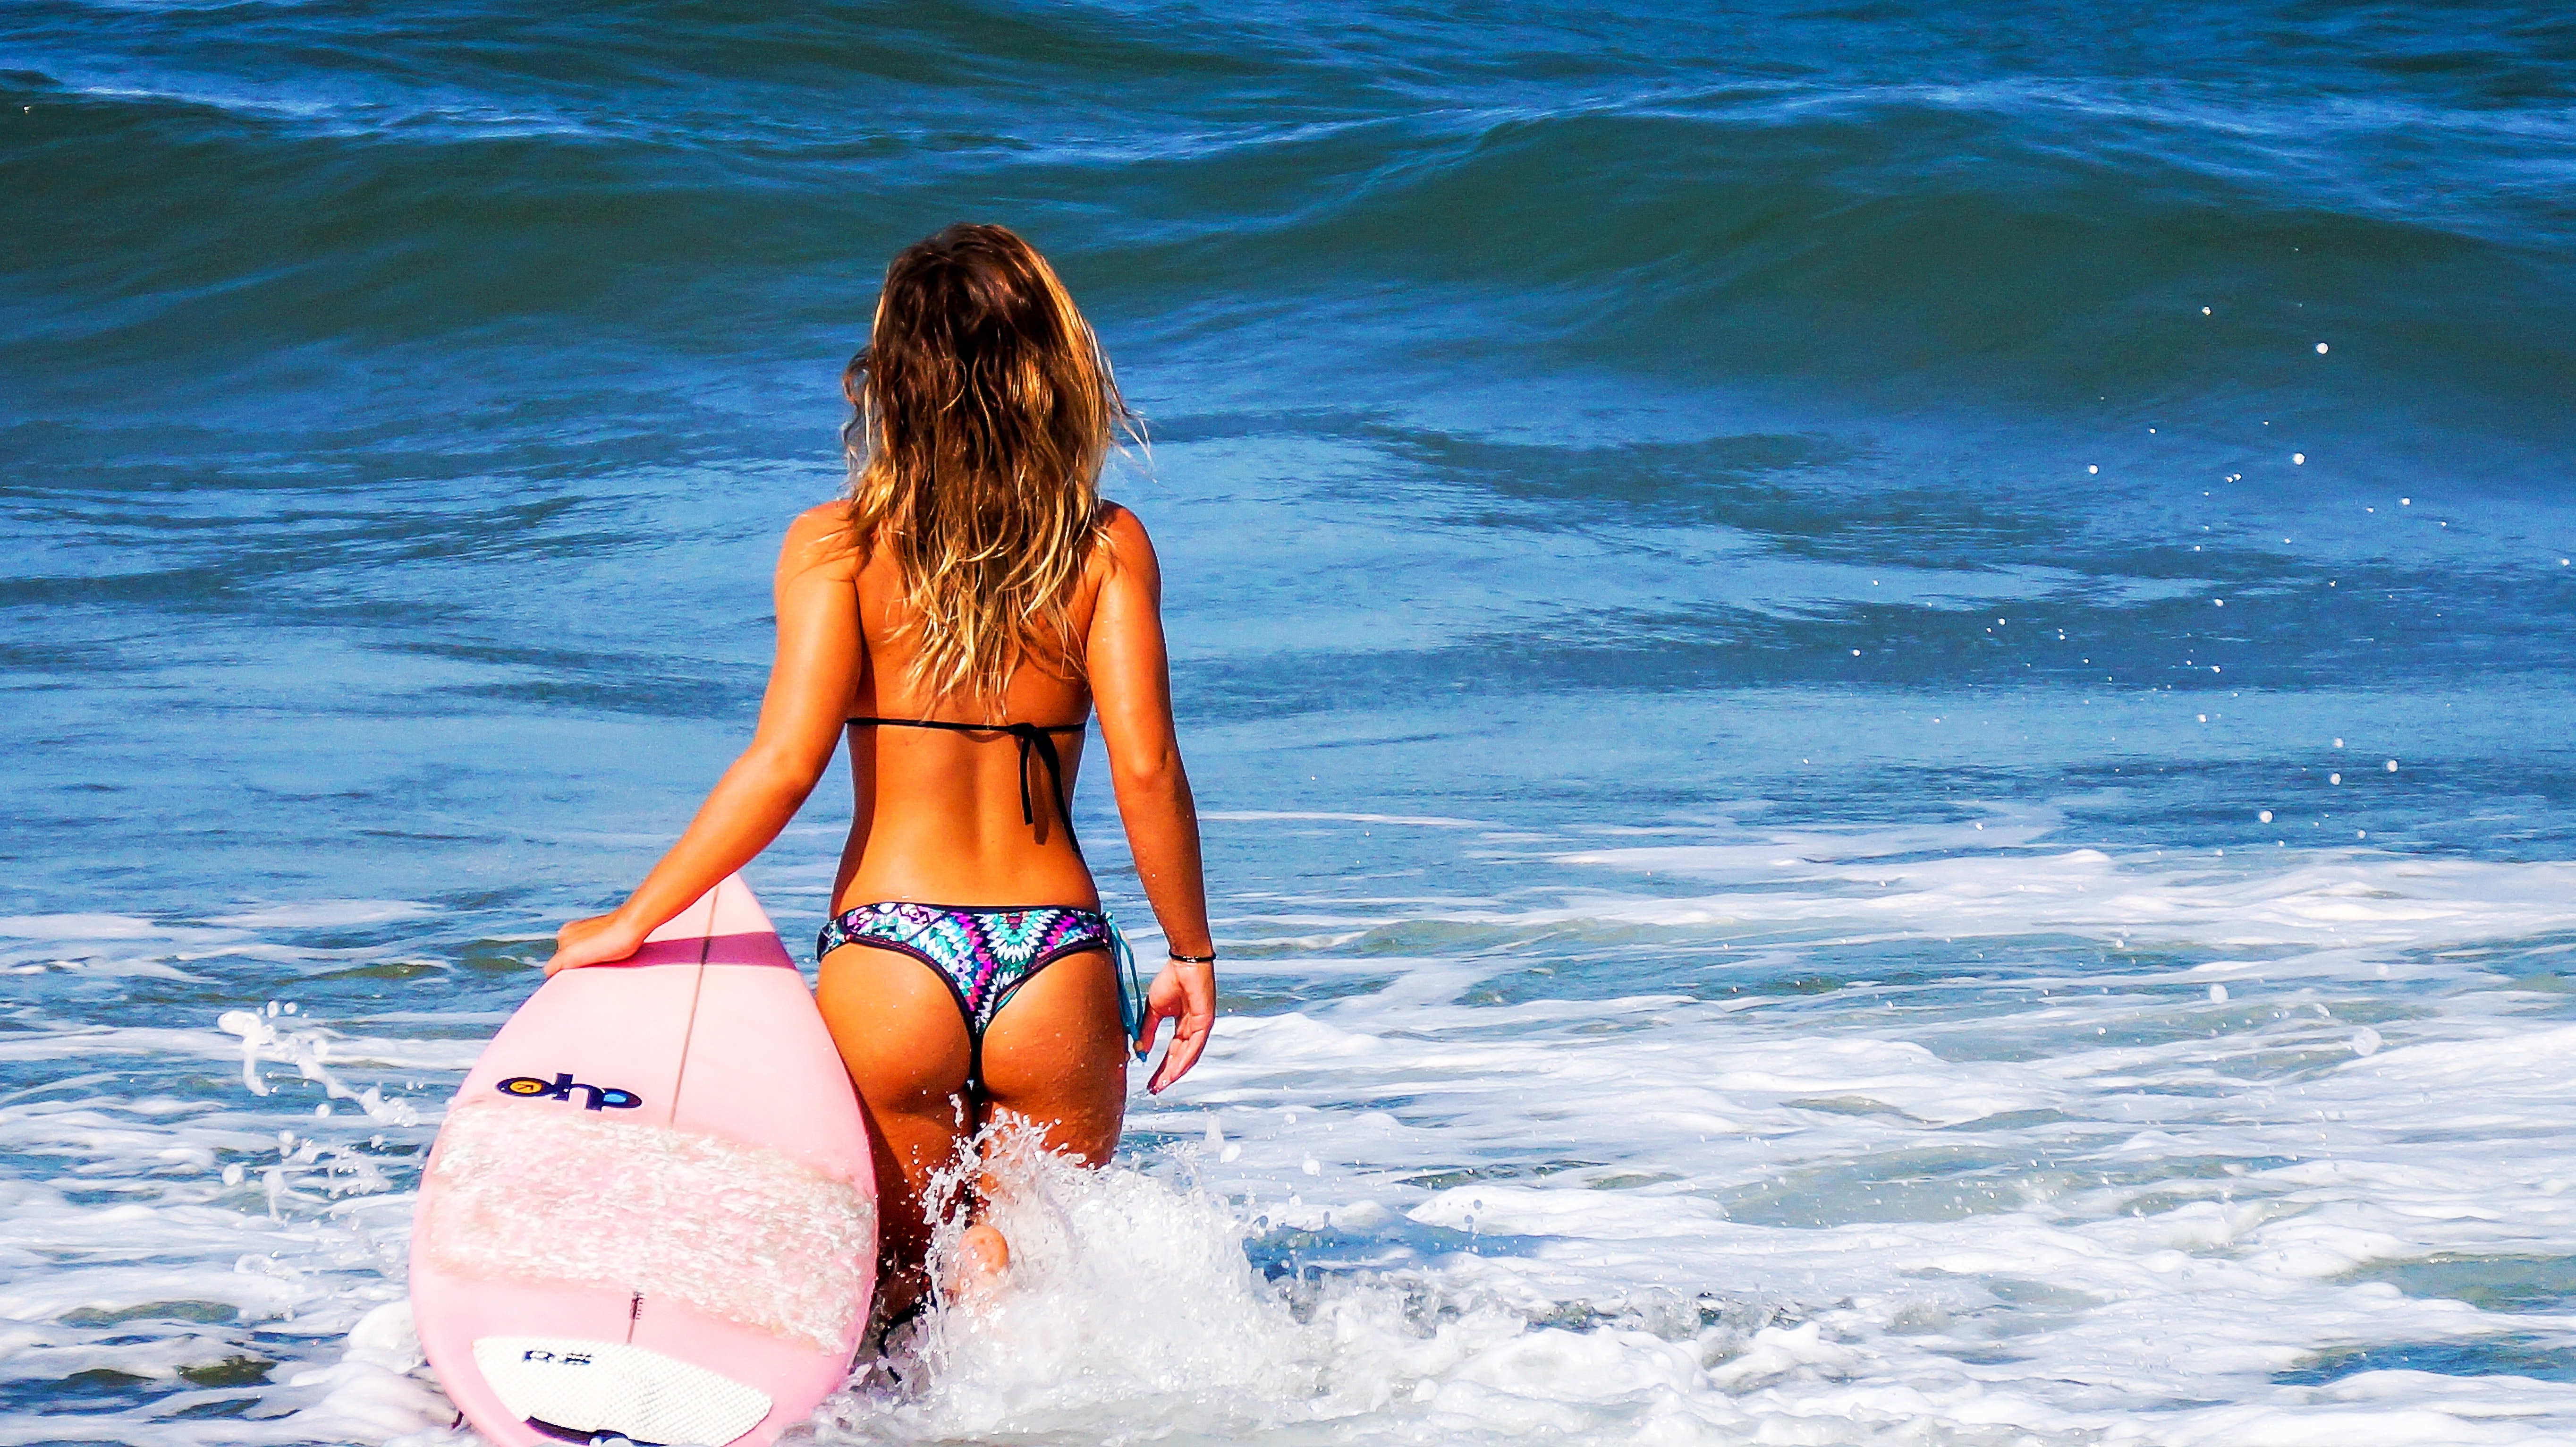 Woman on large body of water during daytime holding surf board photo